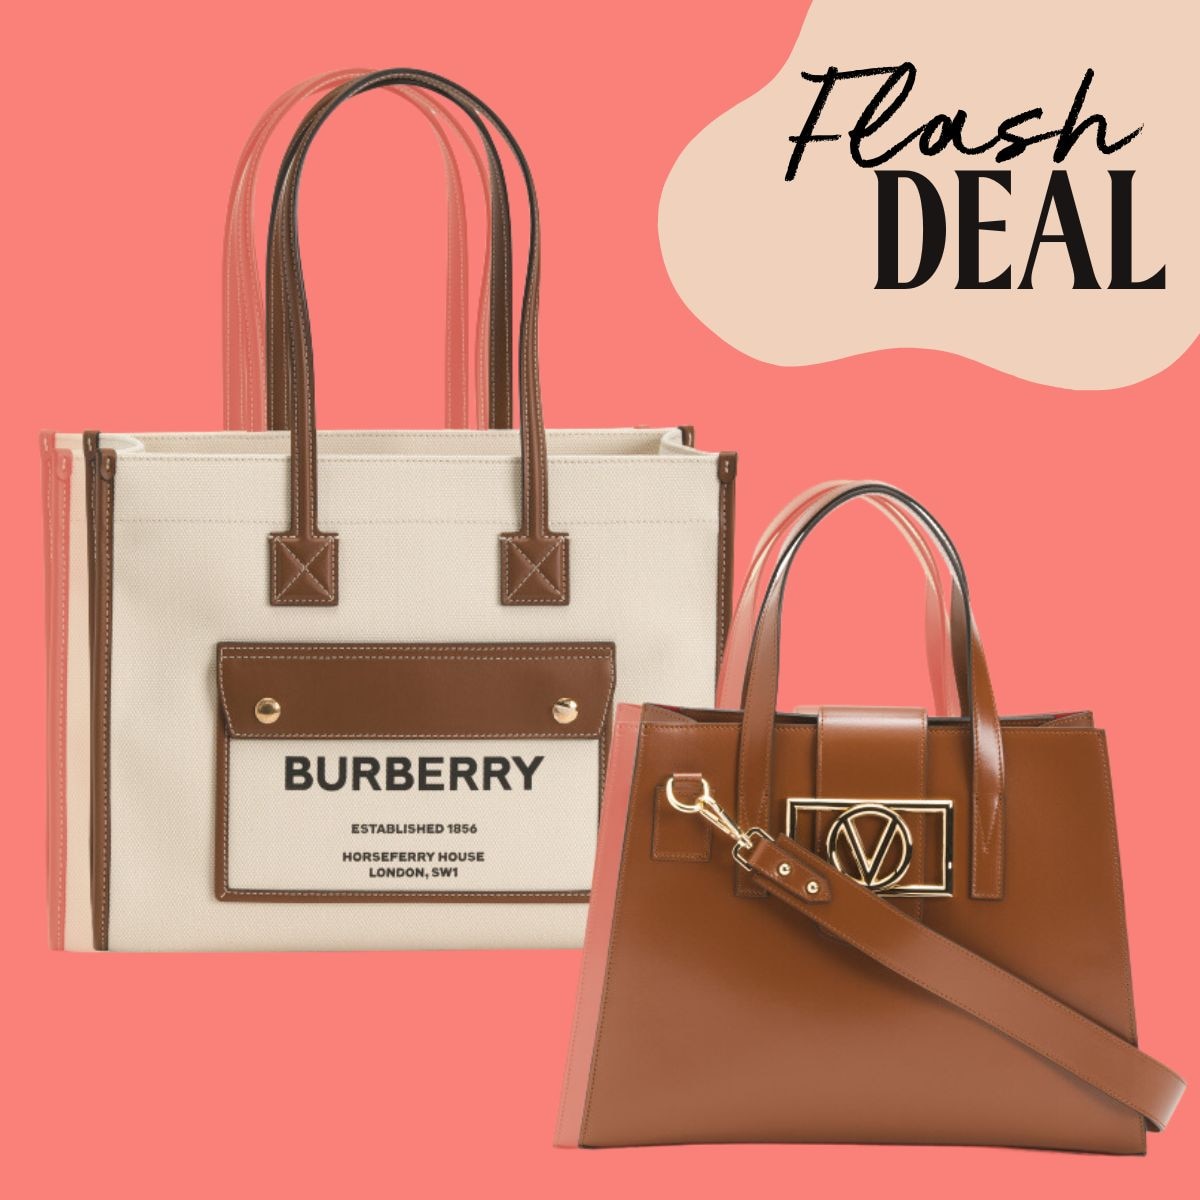 Designer Purses on Sale: Exclusive Deals on High-End Handbags at Rs 999.00  | Yeola| ID: 2851783922662